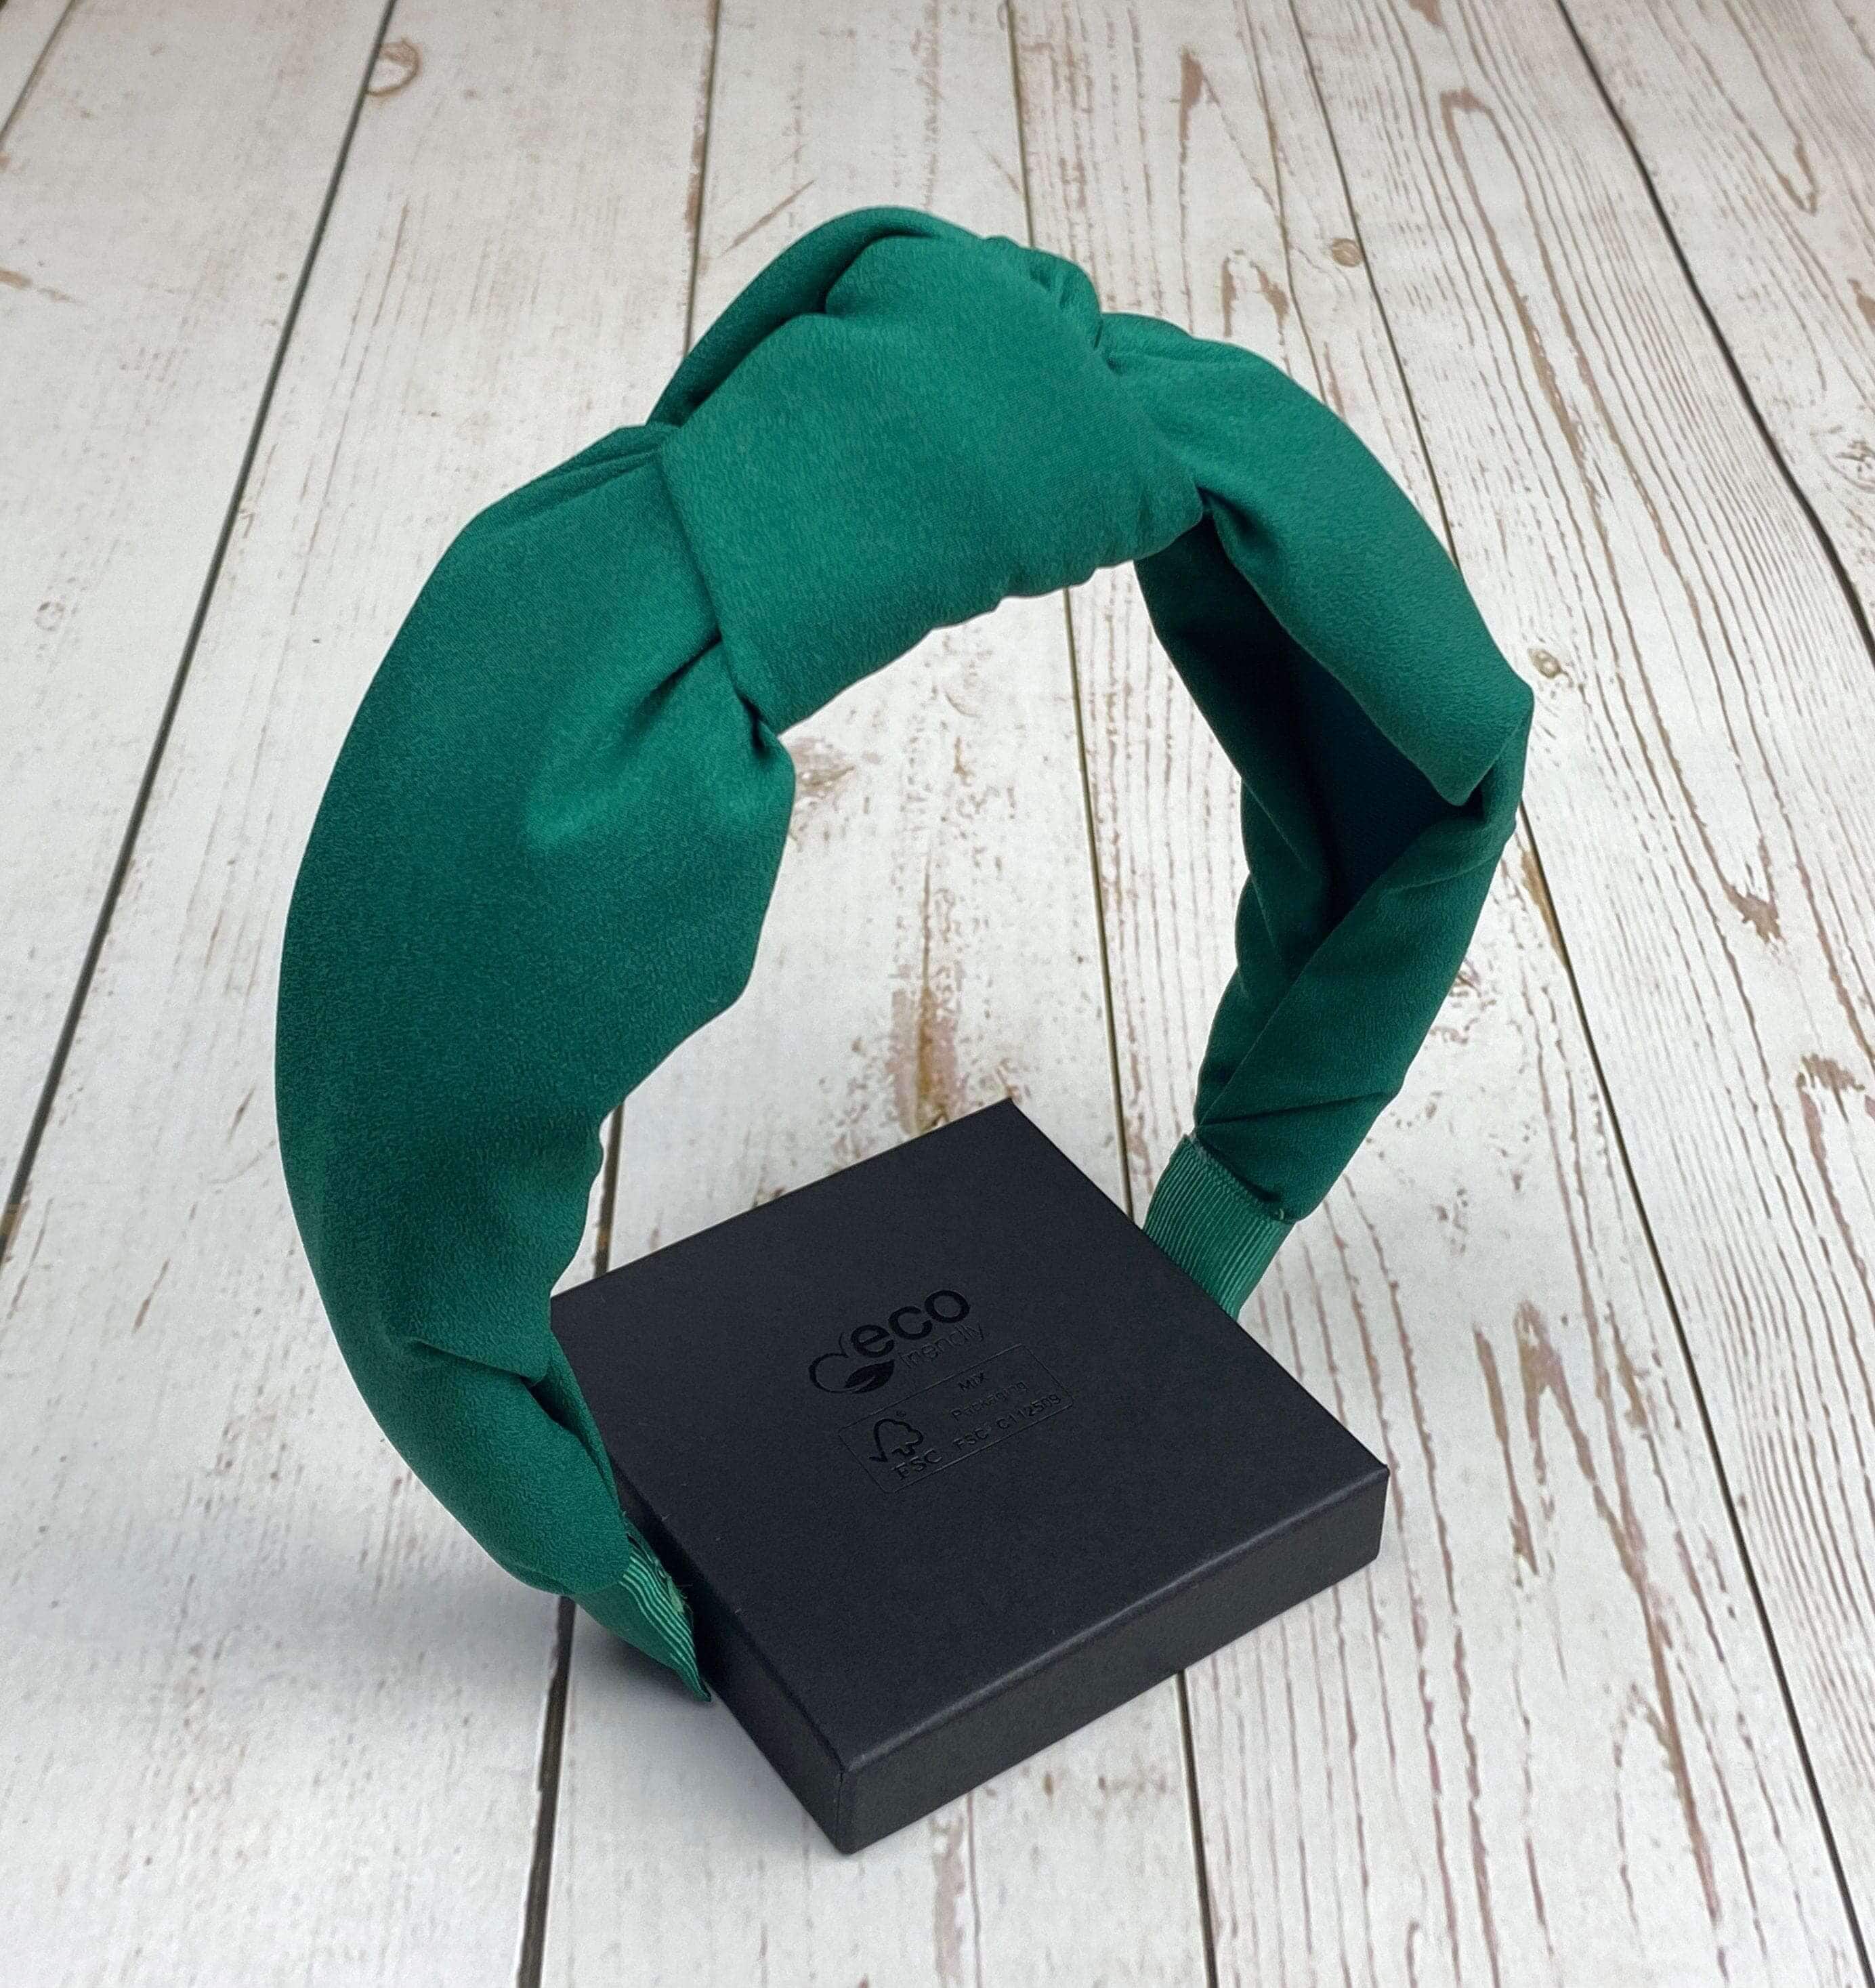 Looking for a stylish headband to add a little flare to your outfit? Check out our range of headbands for women that are made from different materials and colors. Including dark green, knotted headband, wide headband, and more!